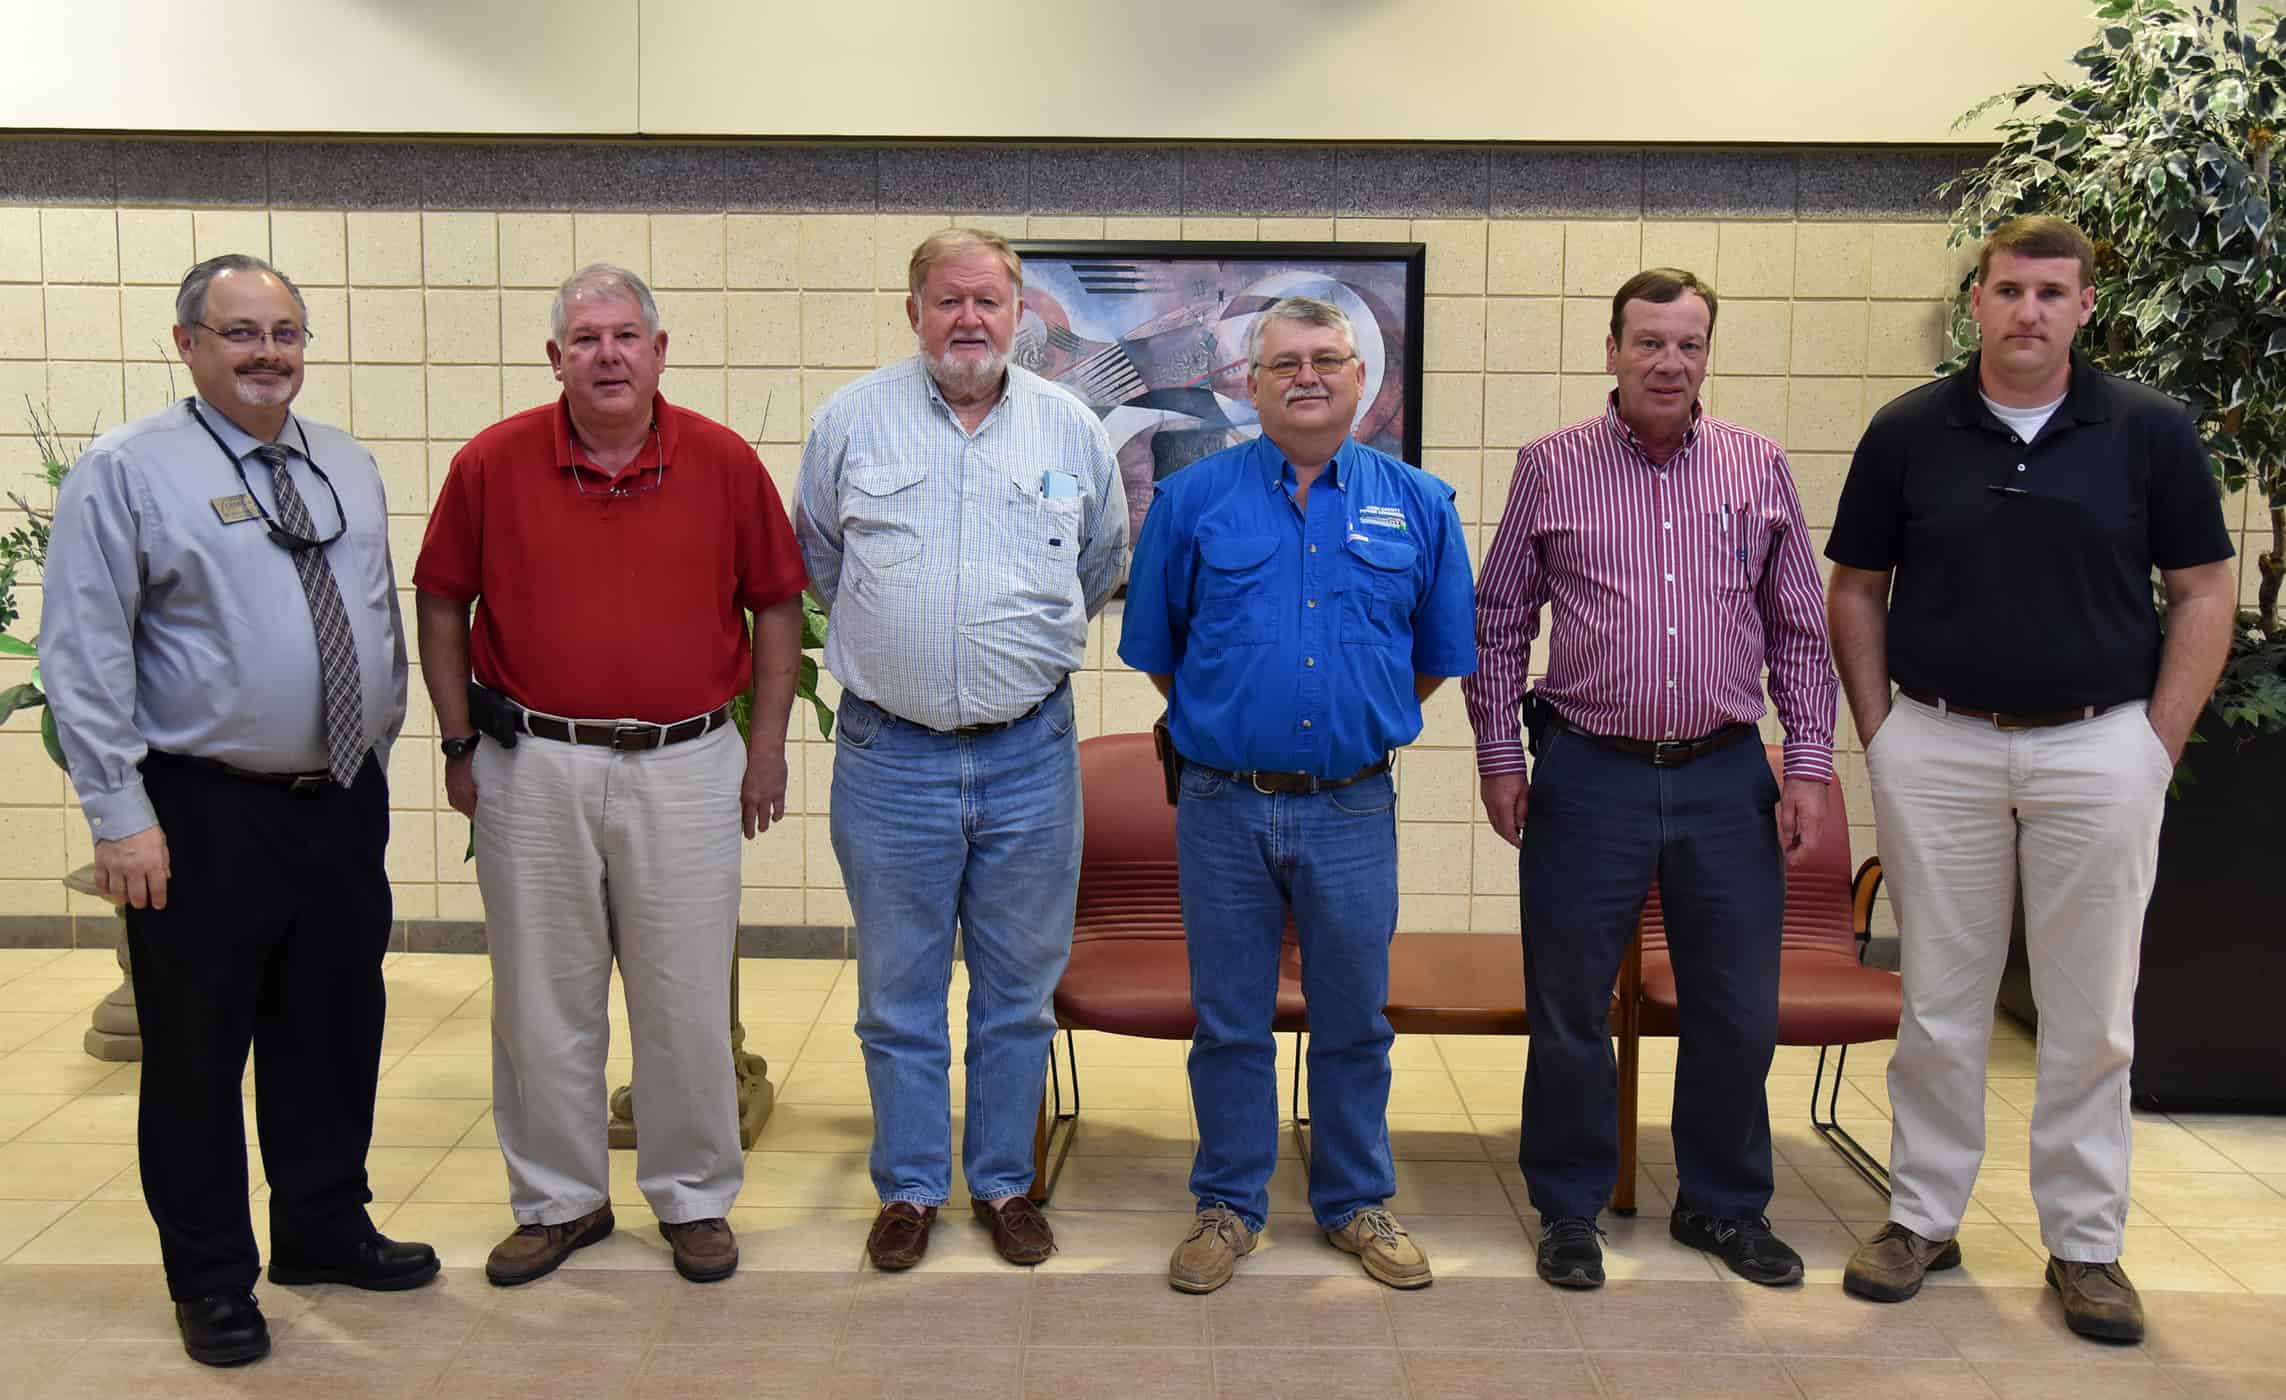 From left to right stand SGTC Electrical Systems Technology advisory committee members Dr. David Finley, Mike Enfinger, Dan Torbert, Ronnie Miller, Darrell Crenshaw and Tyler Wells.